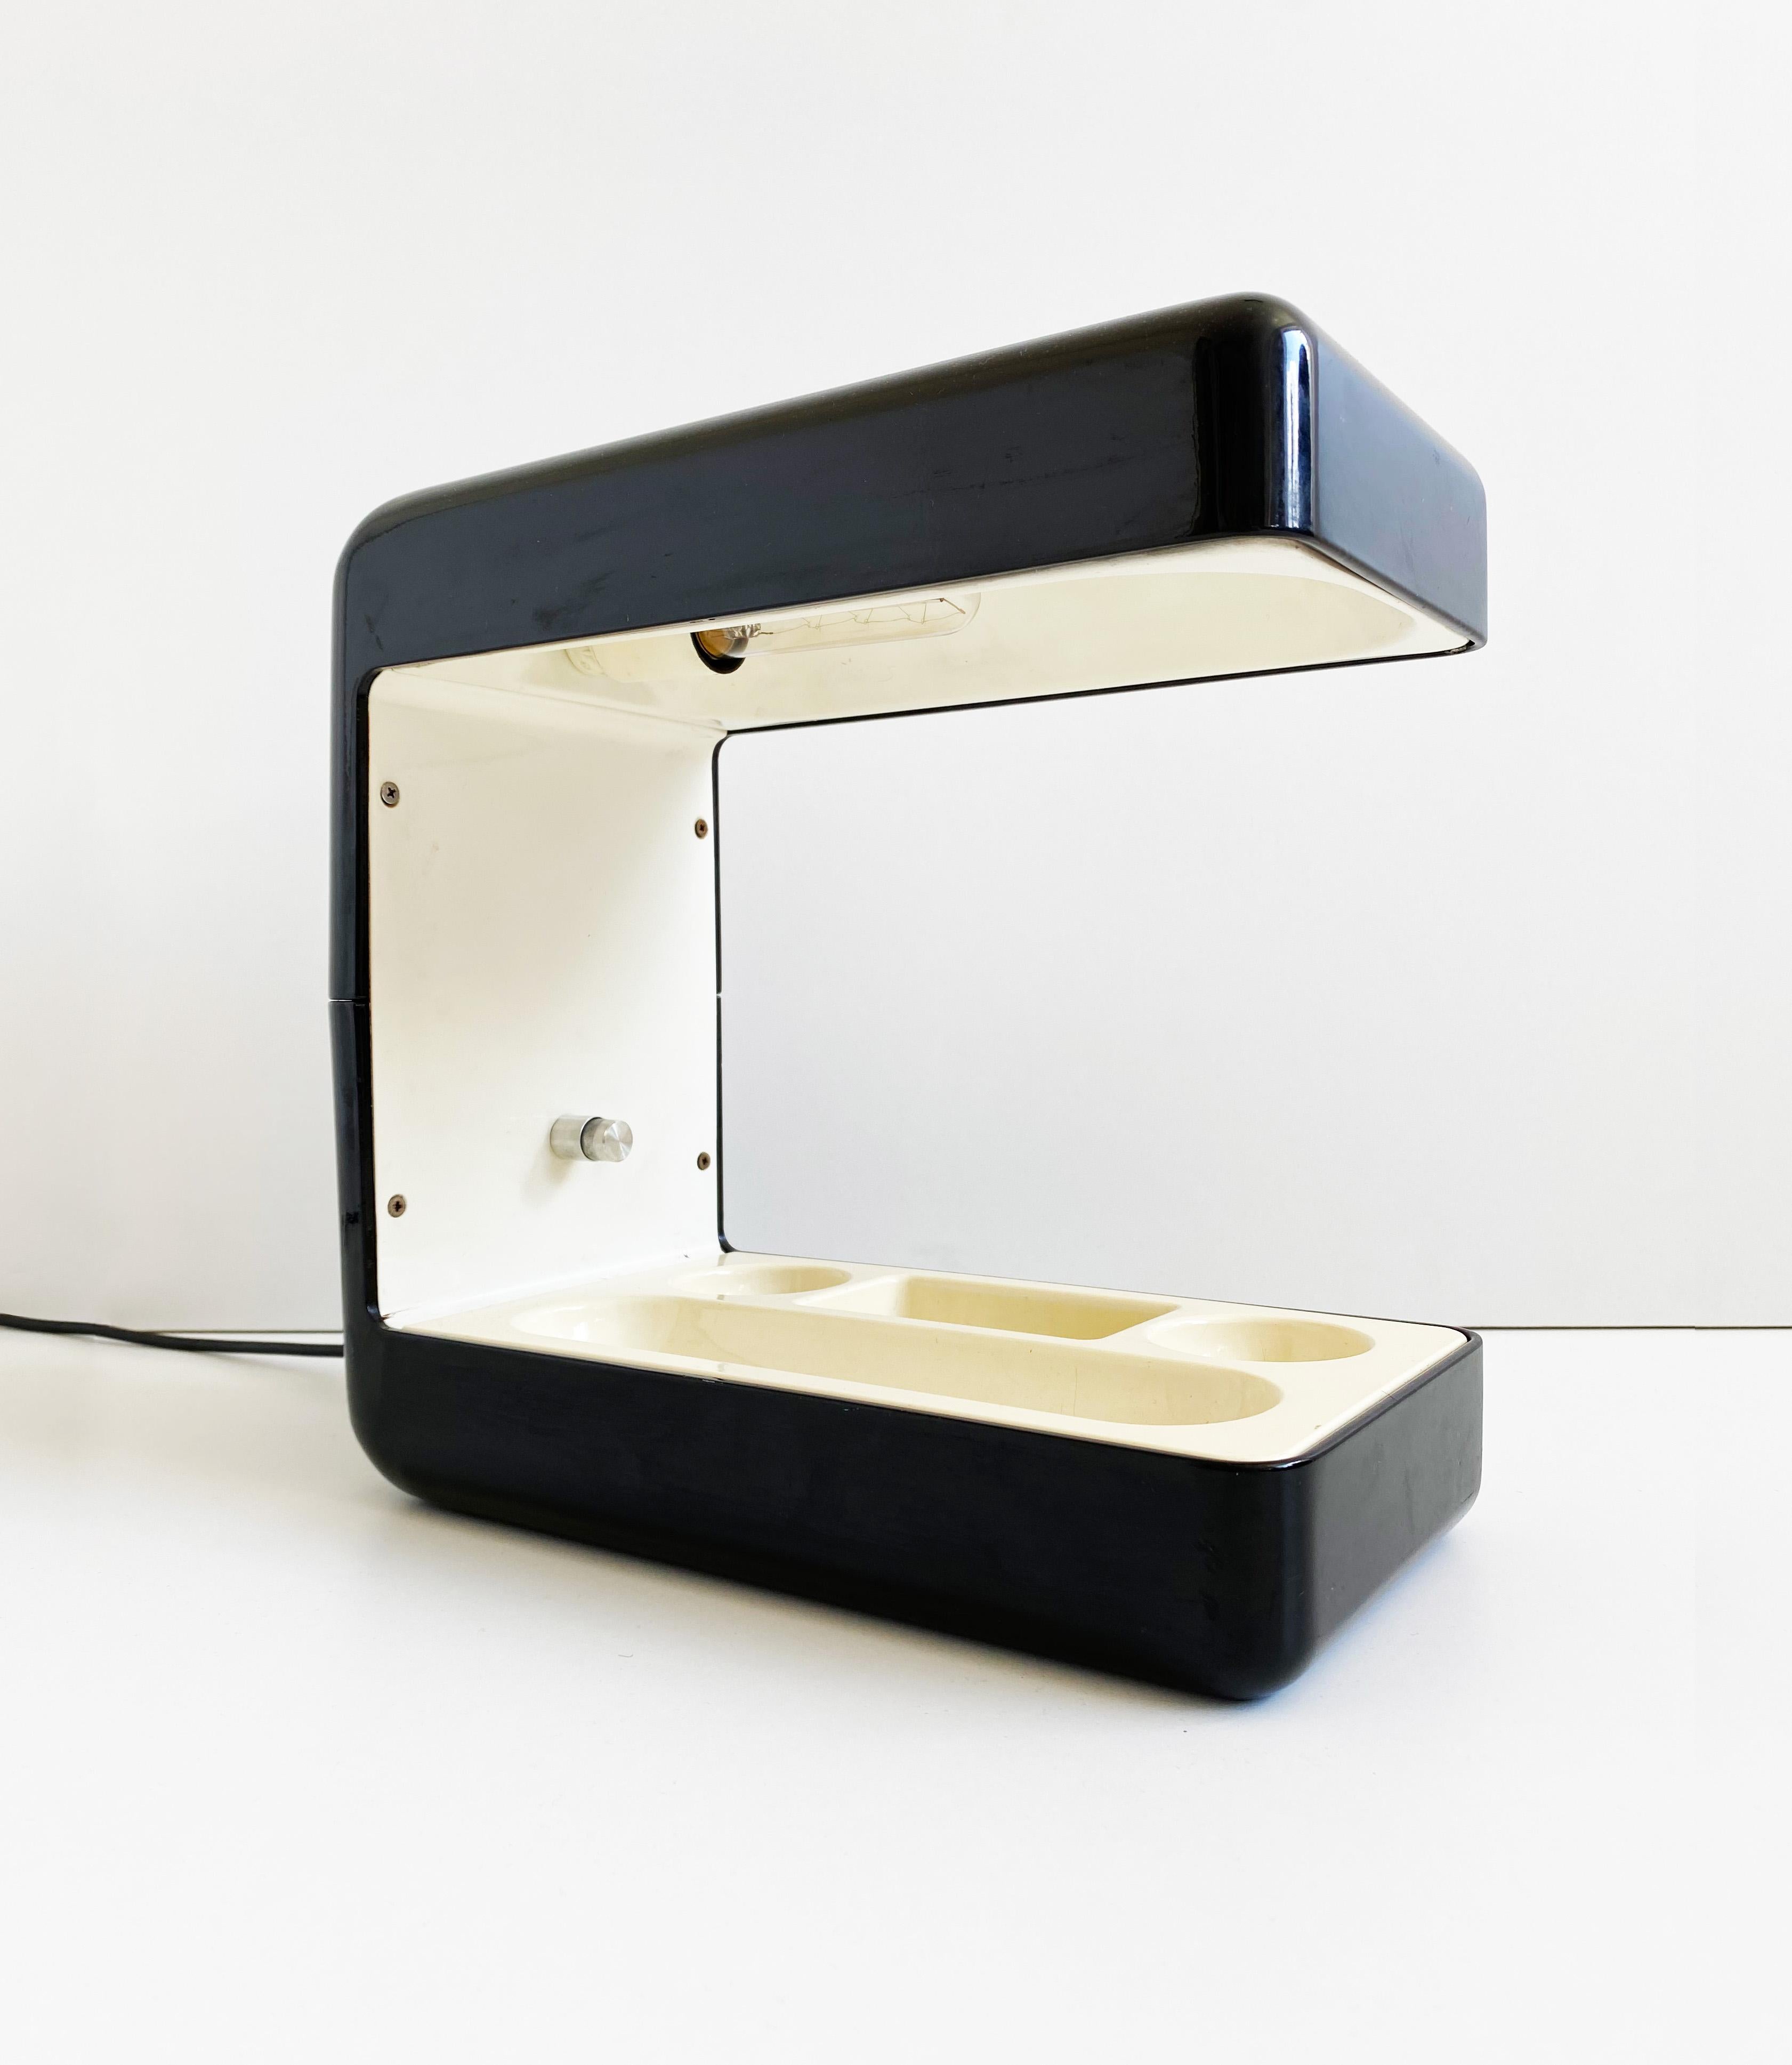 Superb desk lamp, come desk tidy, designed by Giotto Stoppino and manufactured by Tronconi in the 70s. The lamp is formed from a black lacquered aluminium shell with a cream ABS desk tidy insert and a brushed aluminium switch

Condition: Great